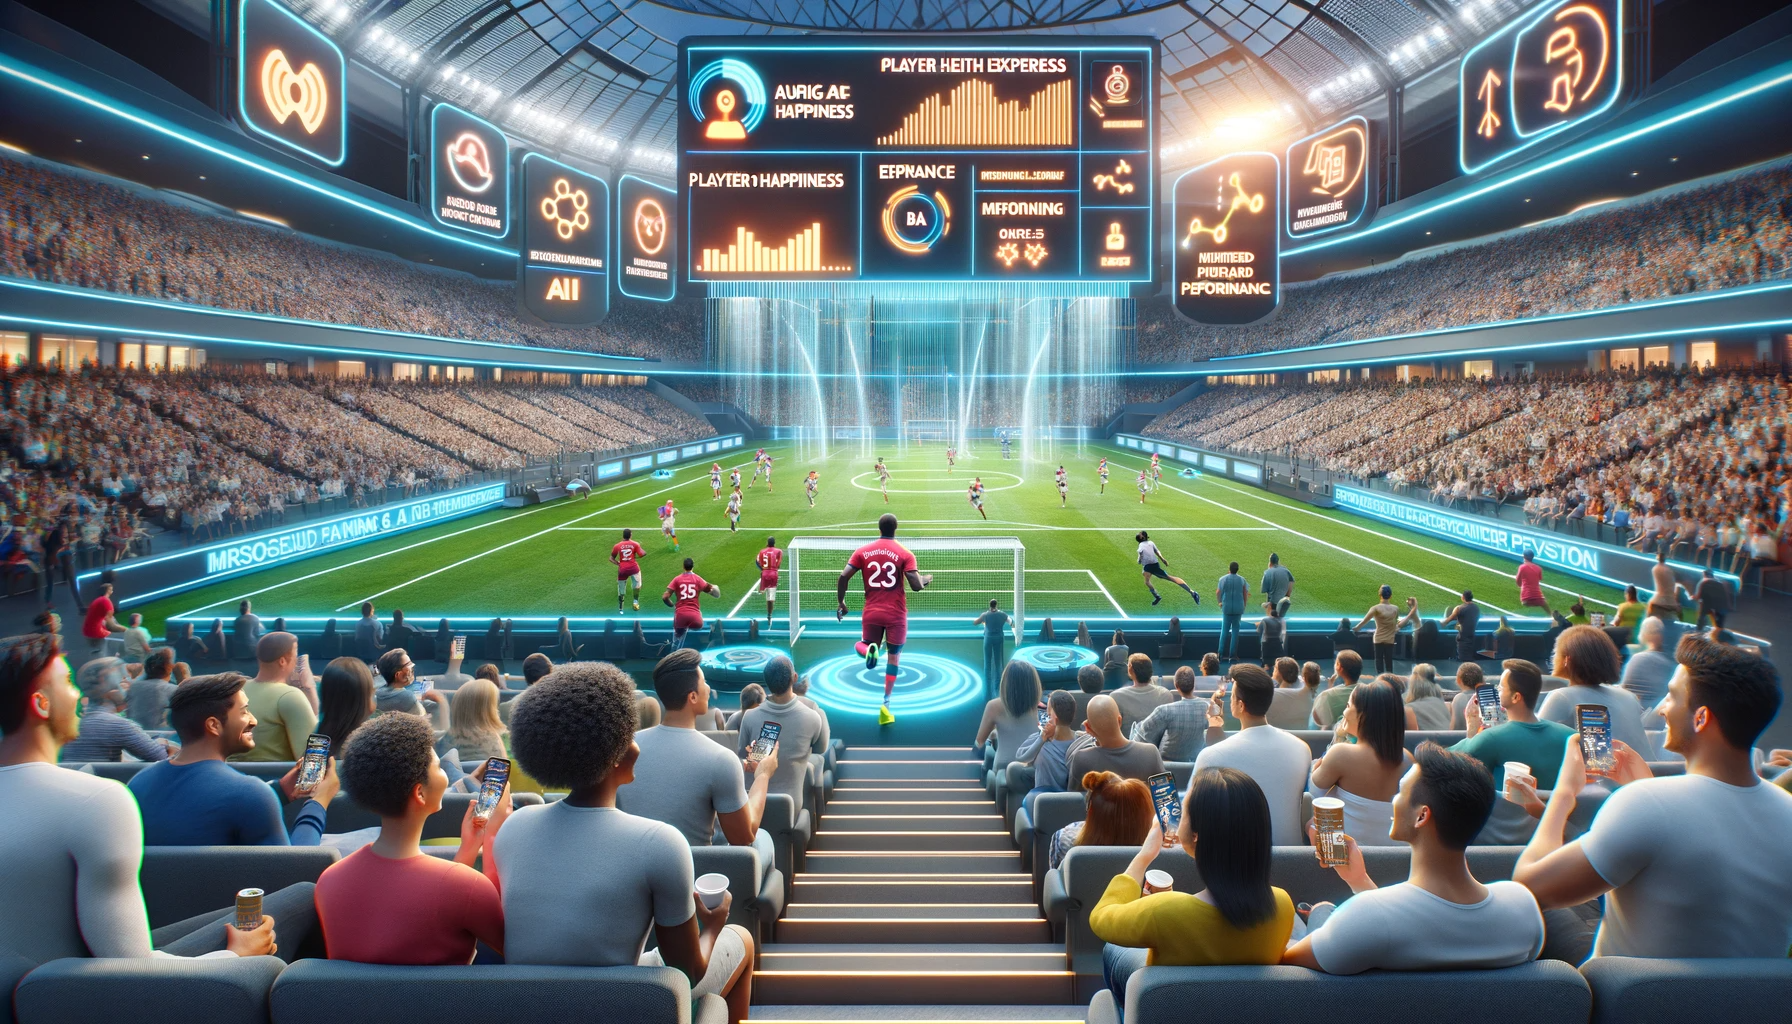 DALL·E 2024-01-03 17.36.56 - Visualize a sports arena and hospitality setting where AI enhances audience happiness and player success, with all text removed. The scene shows AI fe